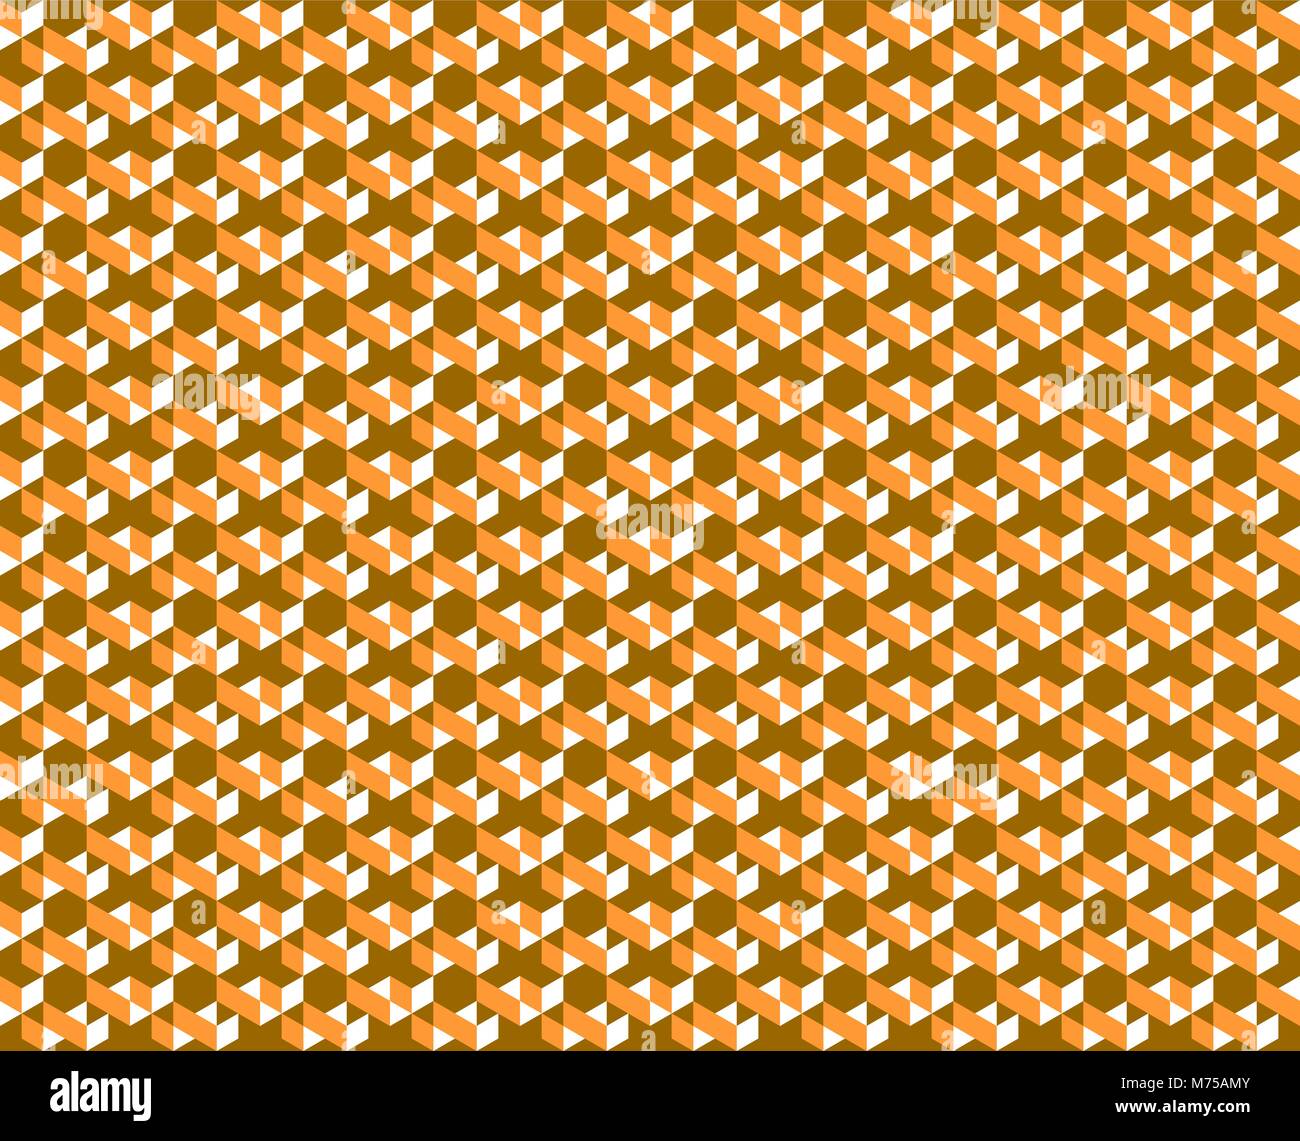 Abstract geometric pattern of dark brown, orange and white colors - Vector illustration. Stock Vector